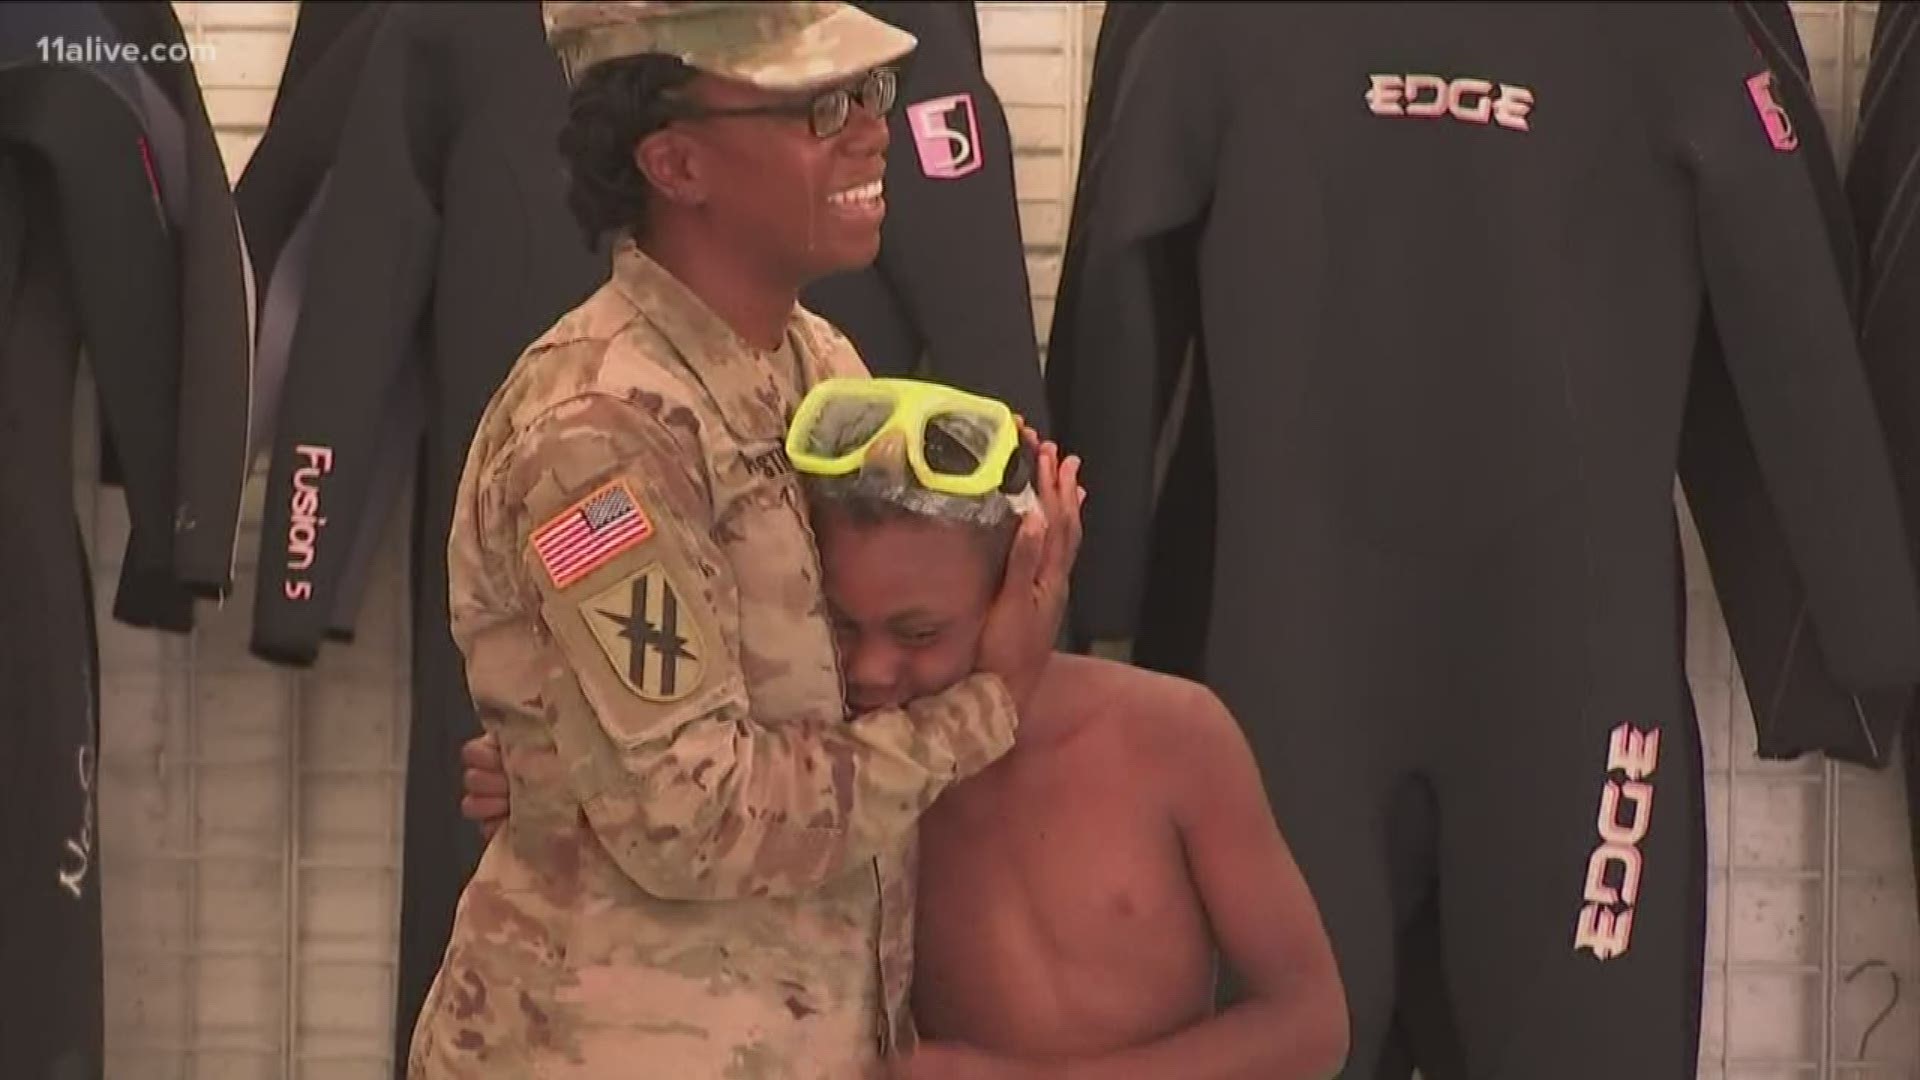 He hadn't seen his mom in 9 months after she was deployed to Afghanistan. When he surfaced during scuba diving class, her face was the first he saw.